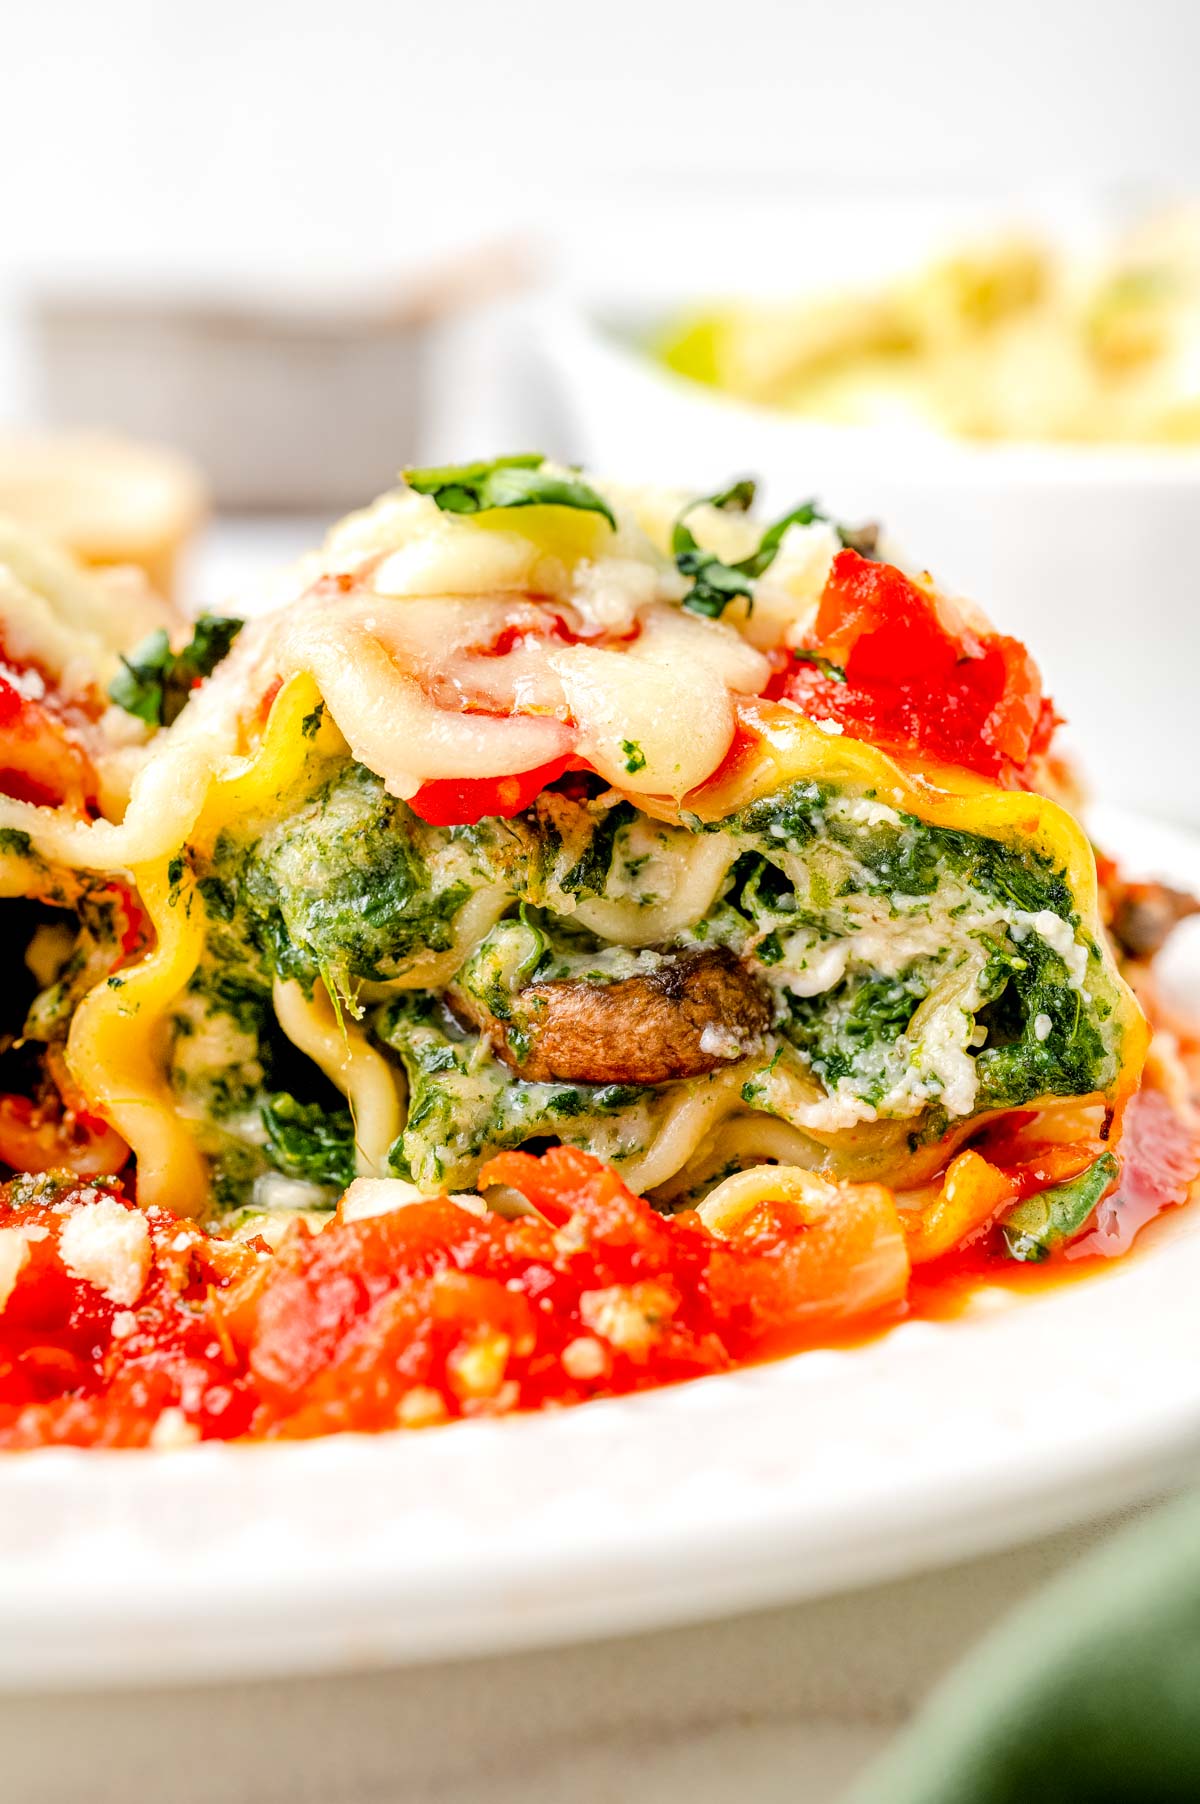 A close up picture of a Spinach Lasagna Roll on a white plate with sauce.